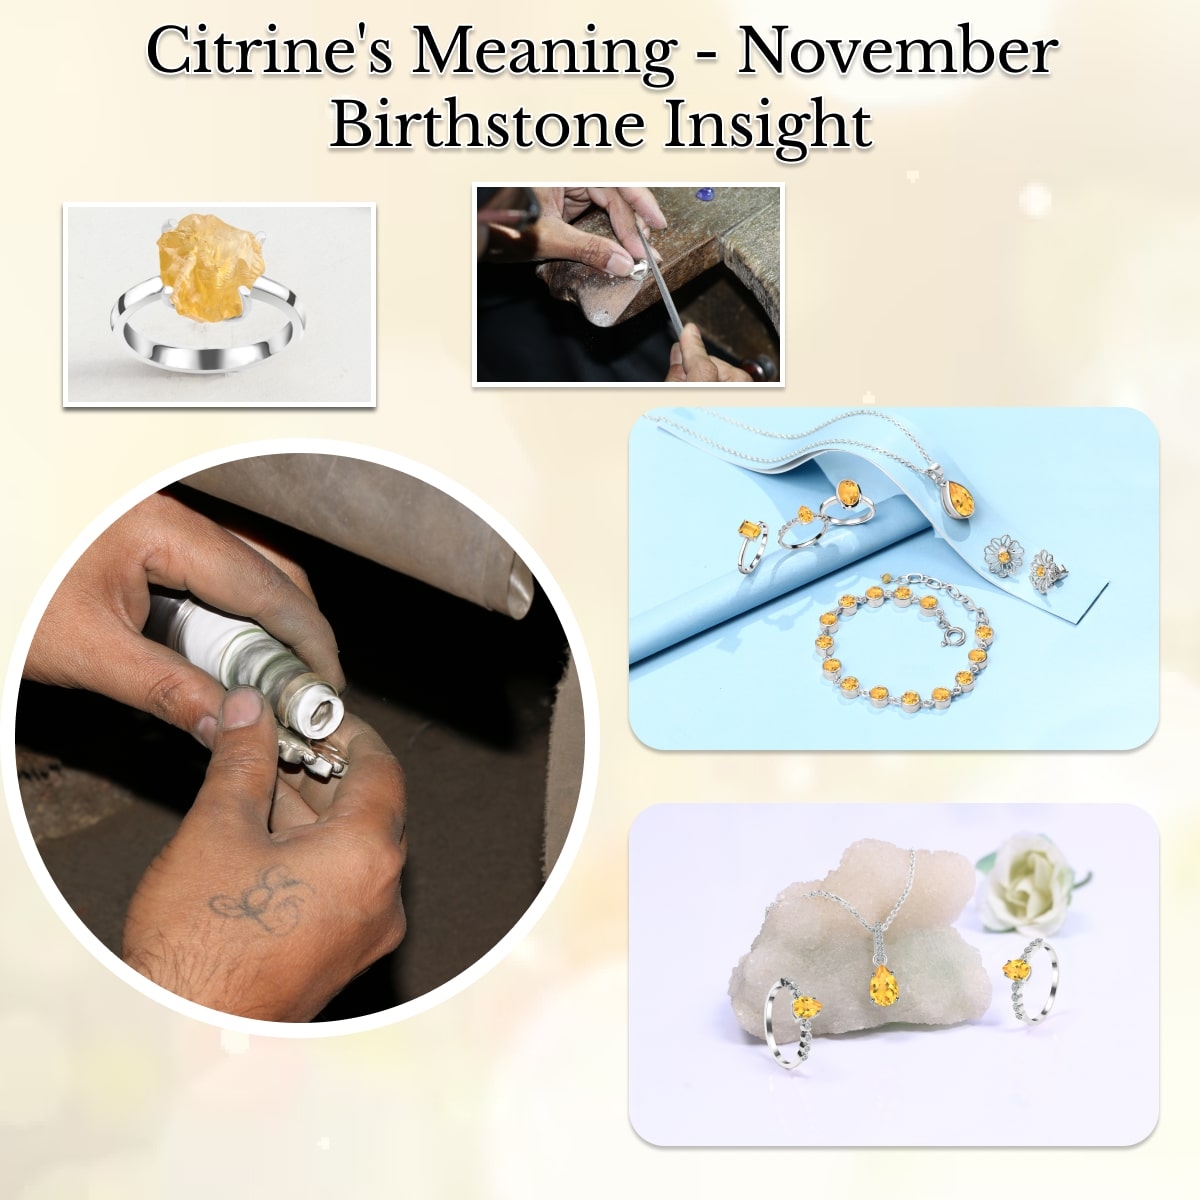 Significance of November Birthstone